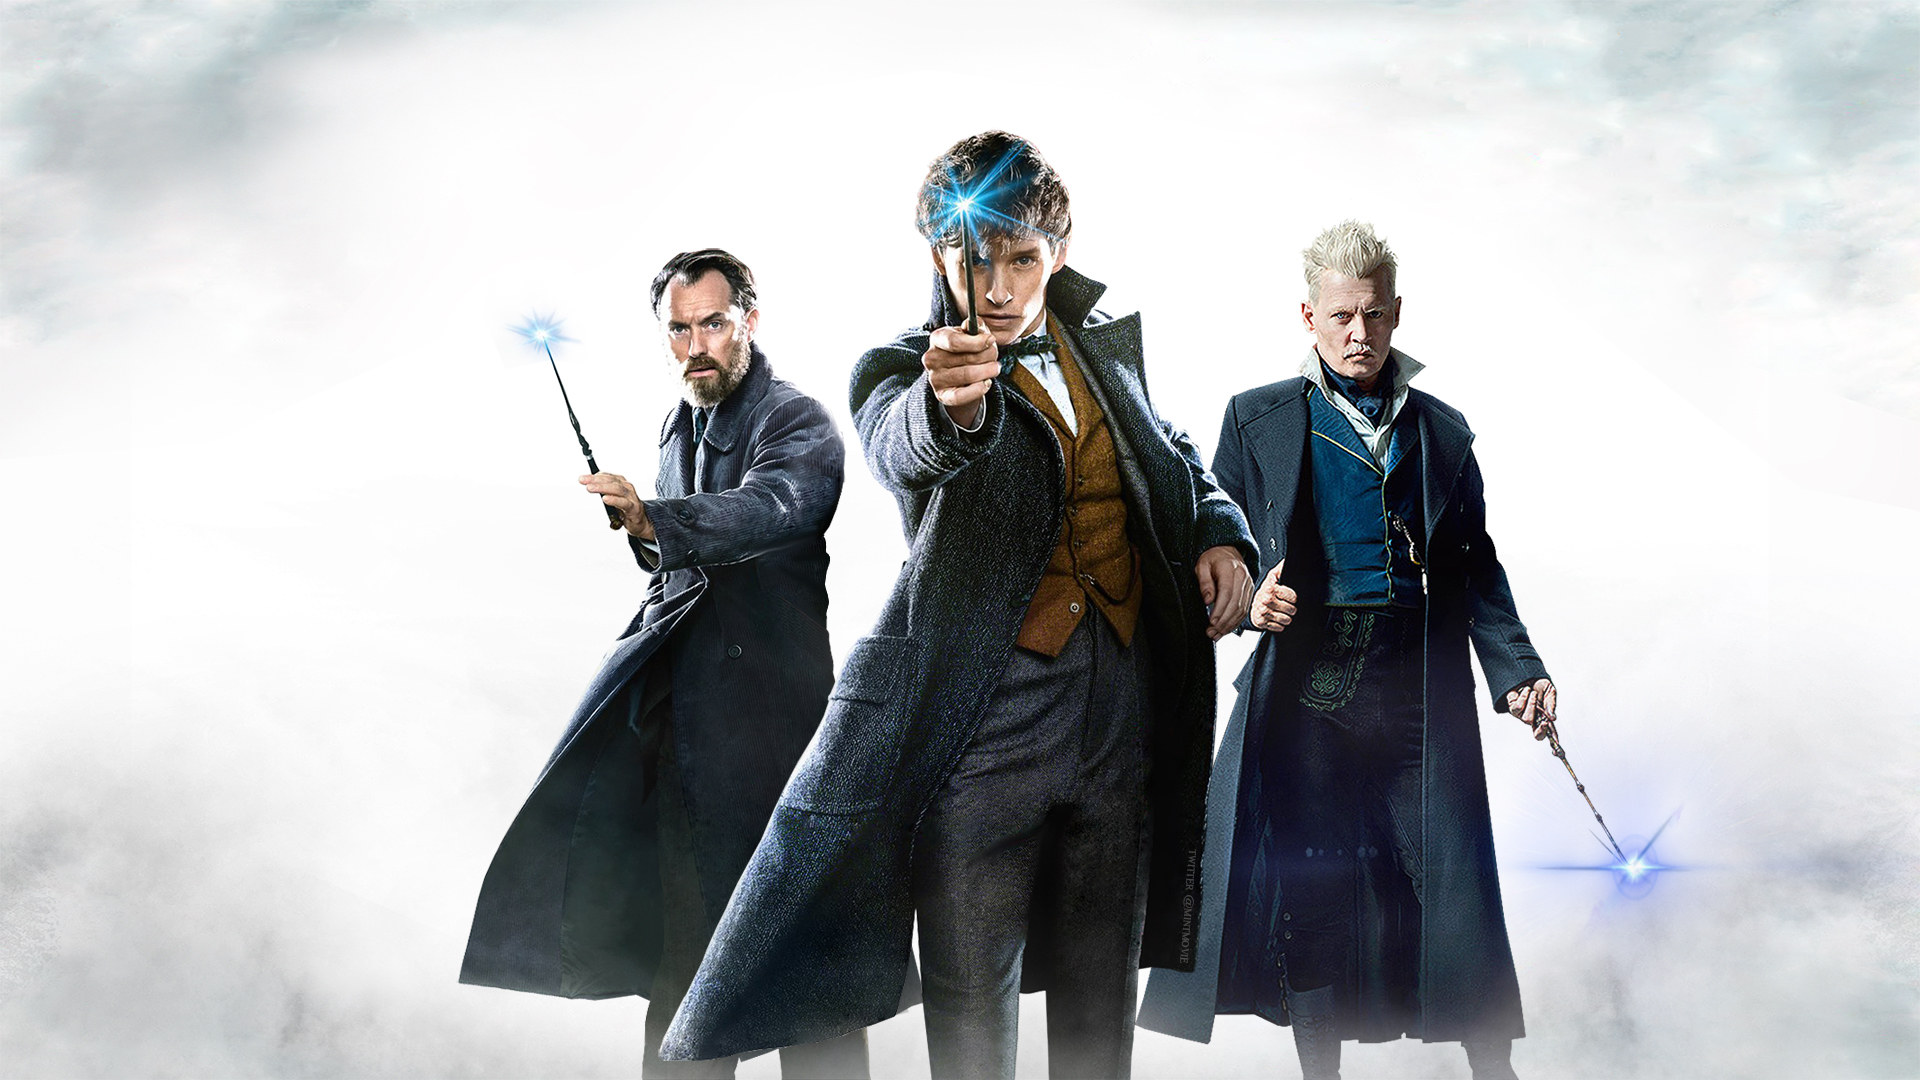 Wallpapers fantastic beasts the crimes of grindelwald 2018 movies movies on the desktop